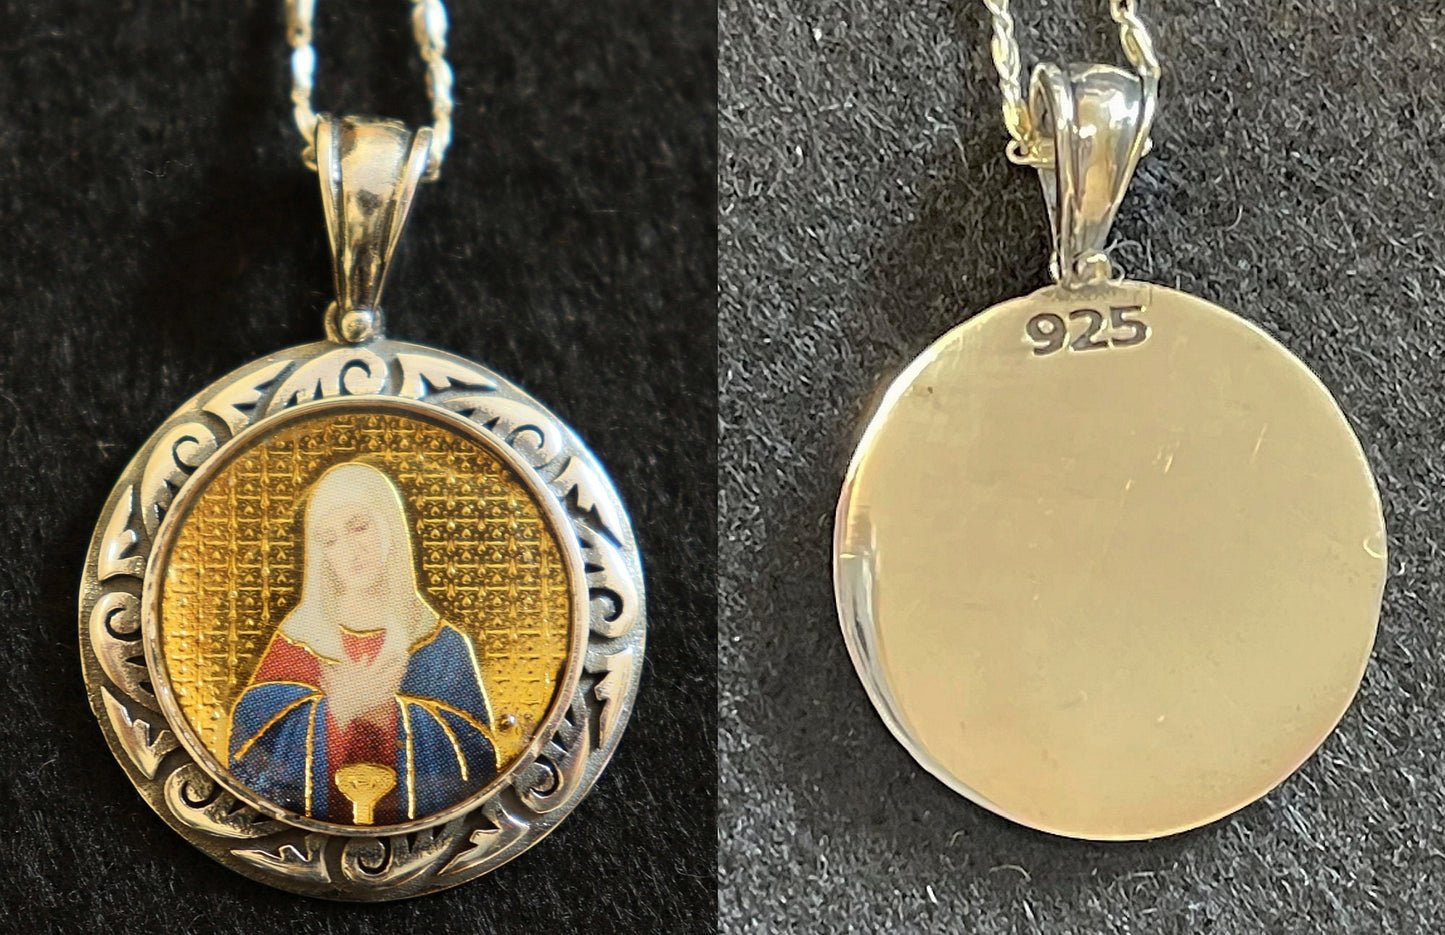 Virgin Mary All Sterling Medal Fine Enameled Serigraphy w Hand Painting